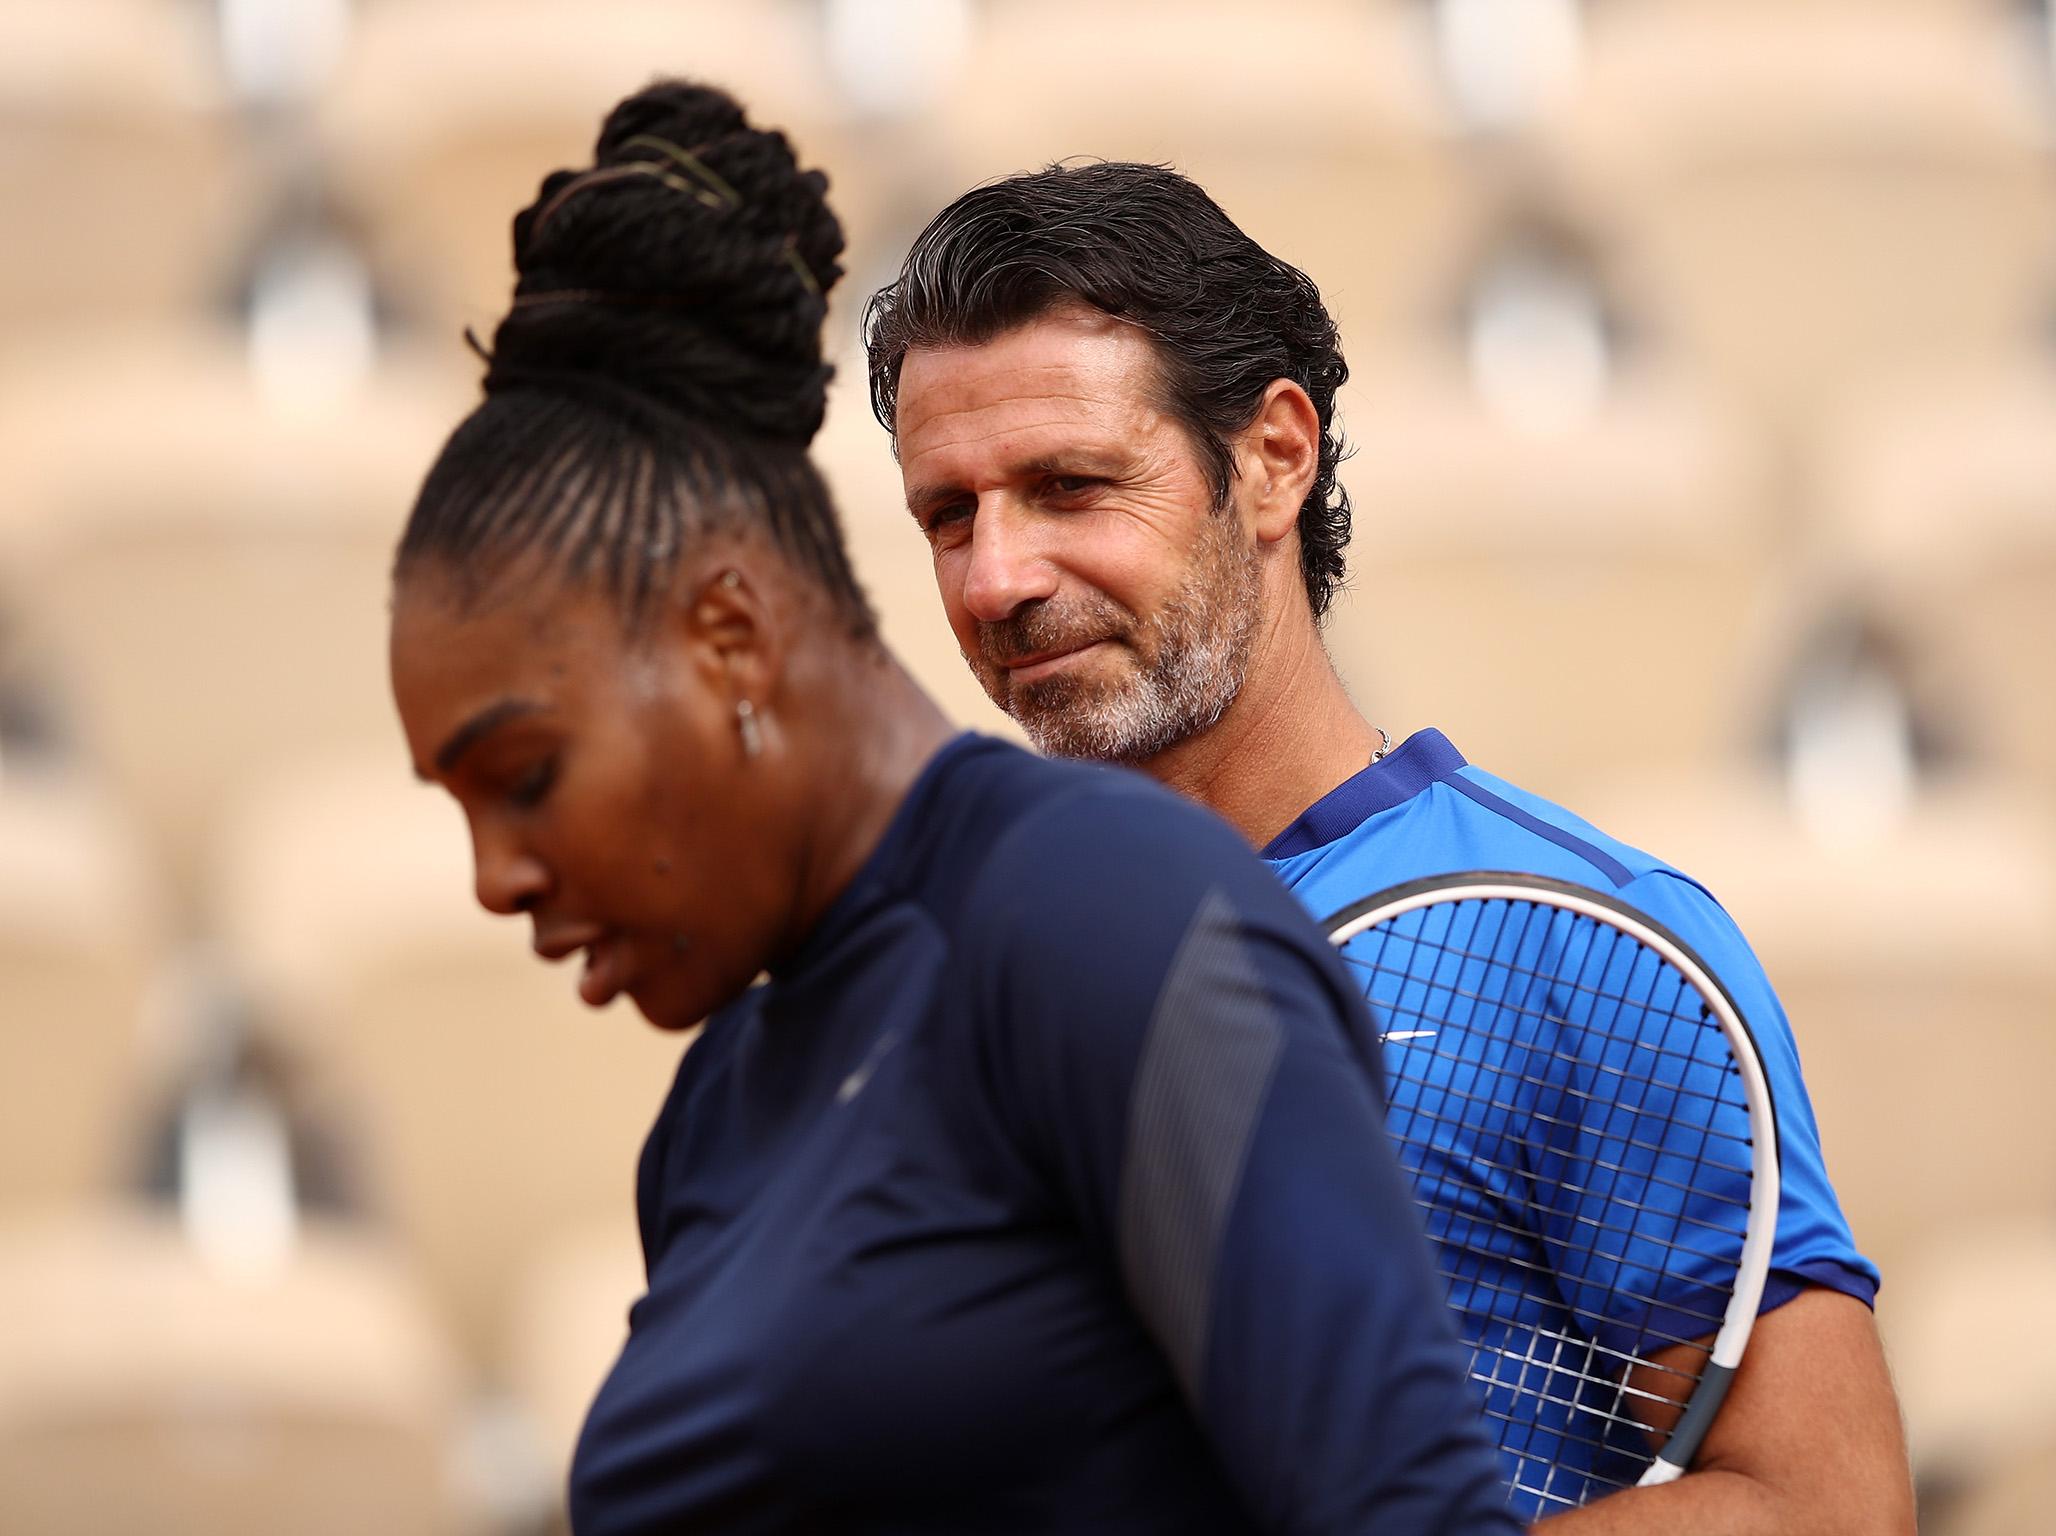 Patrick Mouratoglou's relationship with Serena Williams is under the spotlight